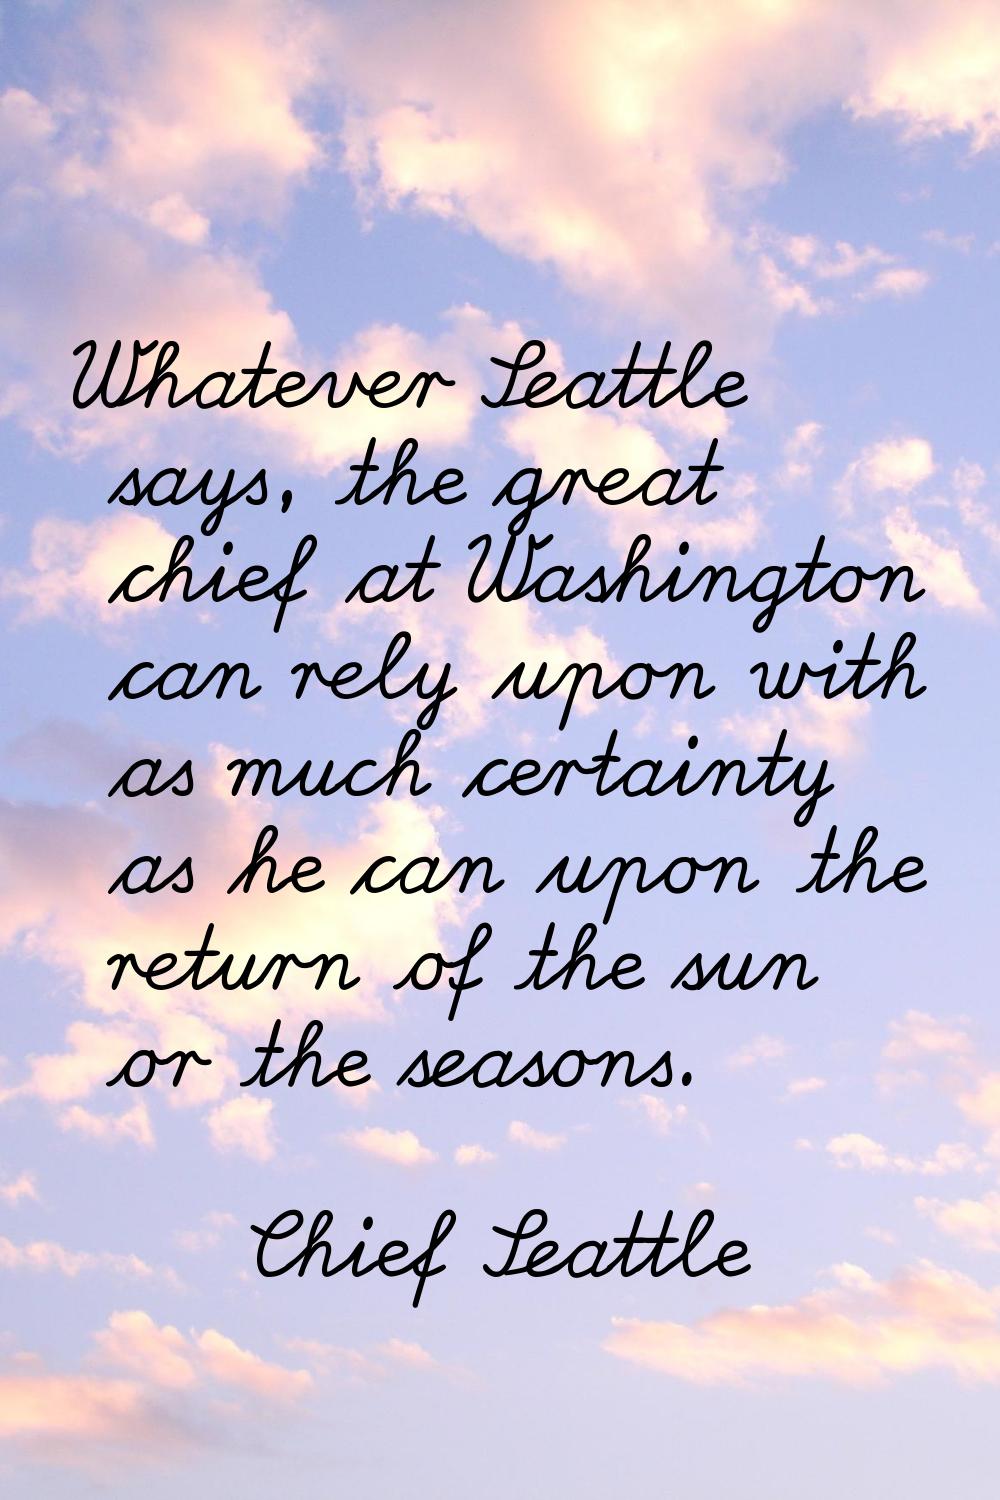 Whatever Seattle says, the great chief at Washington can rely upon with as much certainty as he can